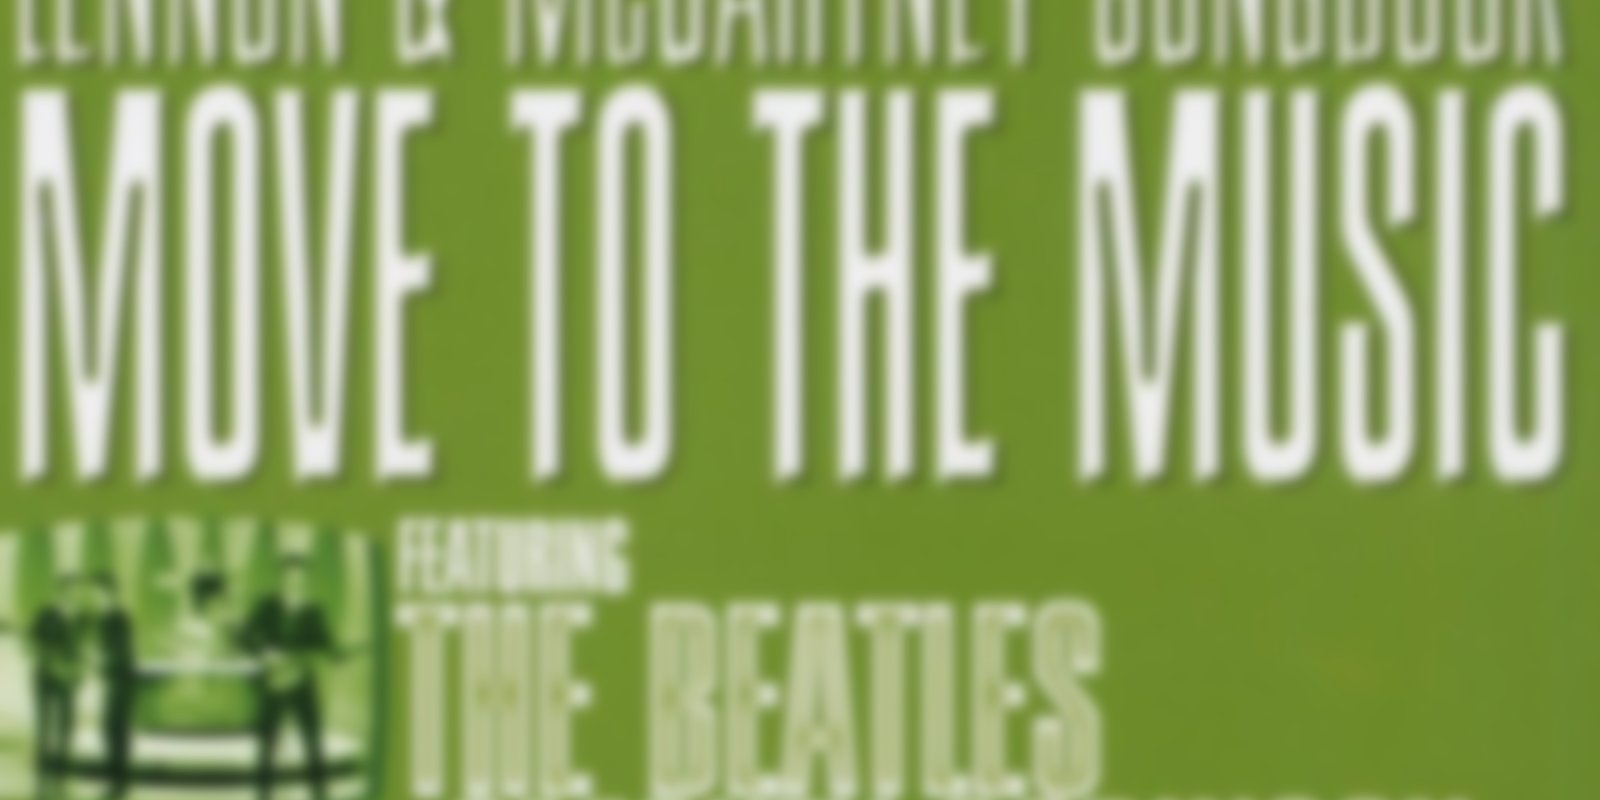 Lennon & McCartney Songbook - Move to the Music